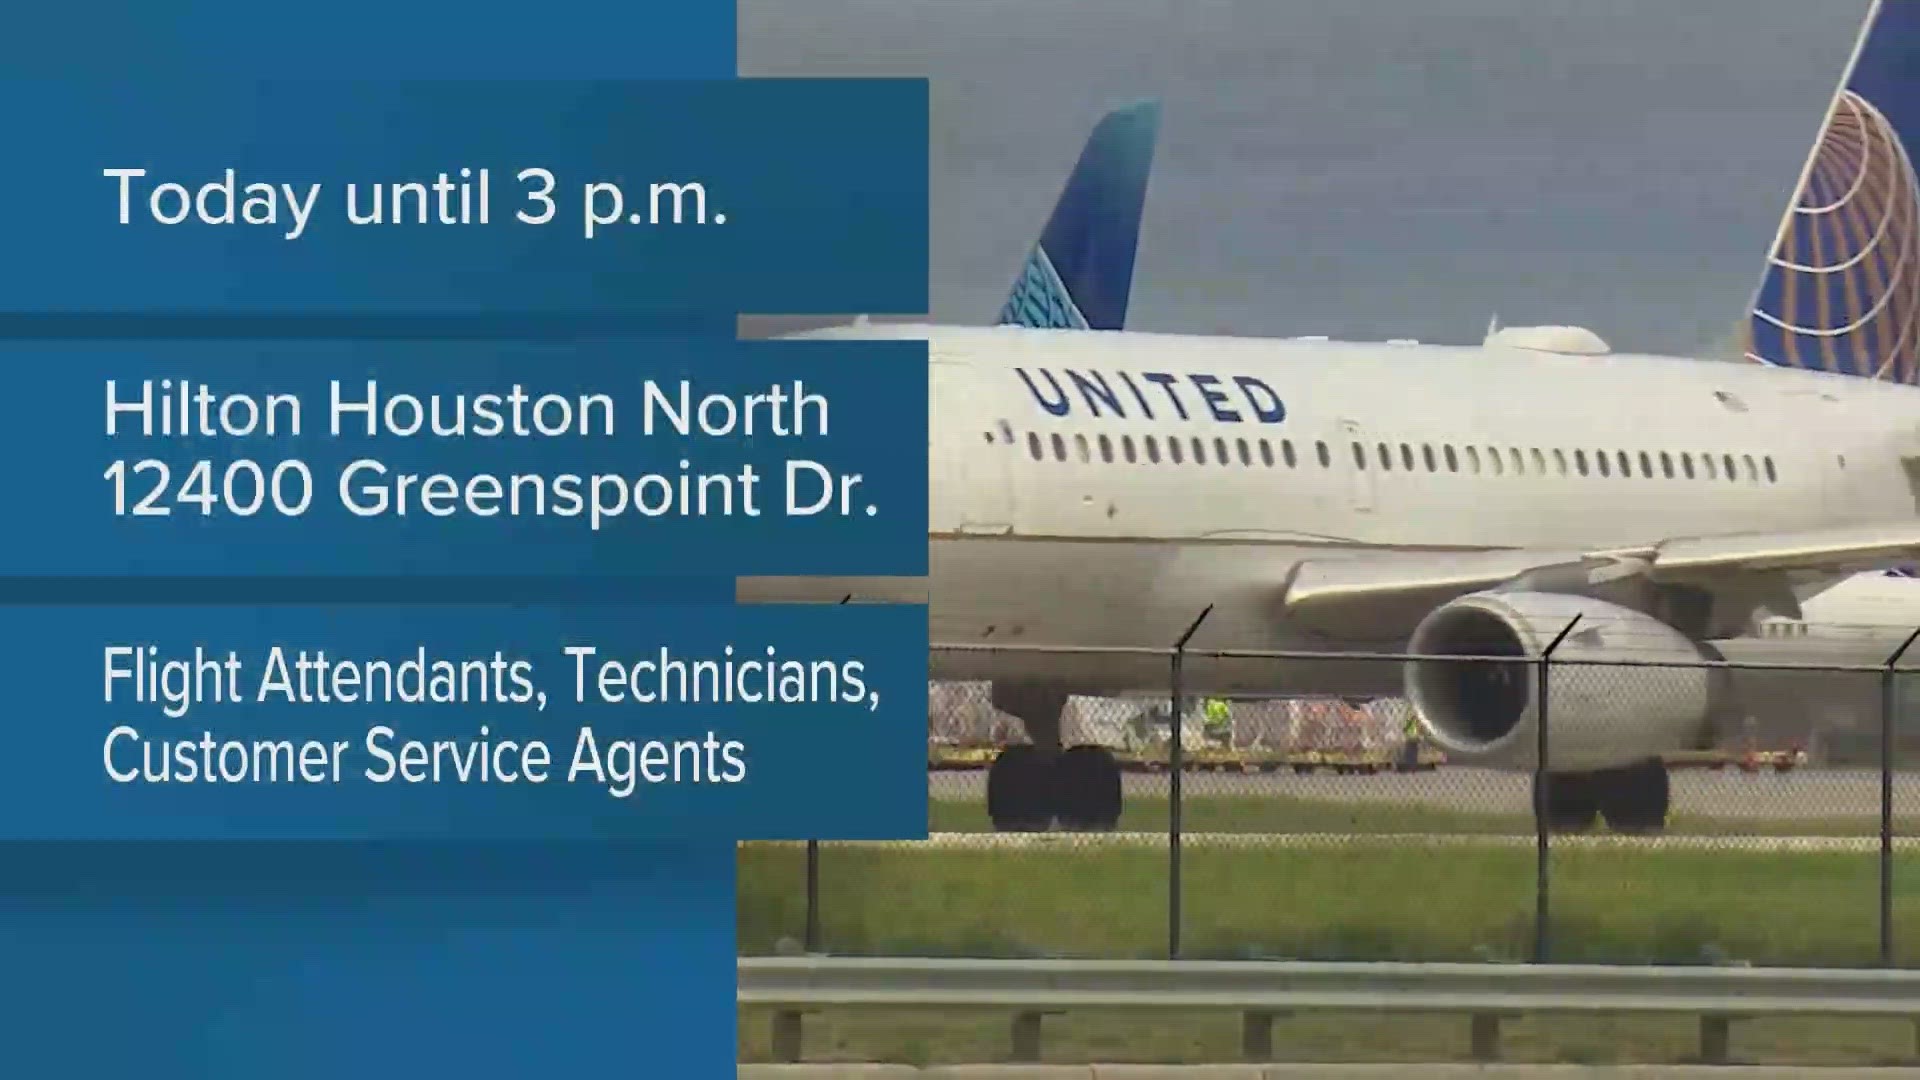 United is hosting a career fair Thursday for jobs that include flight attendants, customer service and ramp agents.